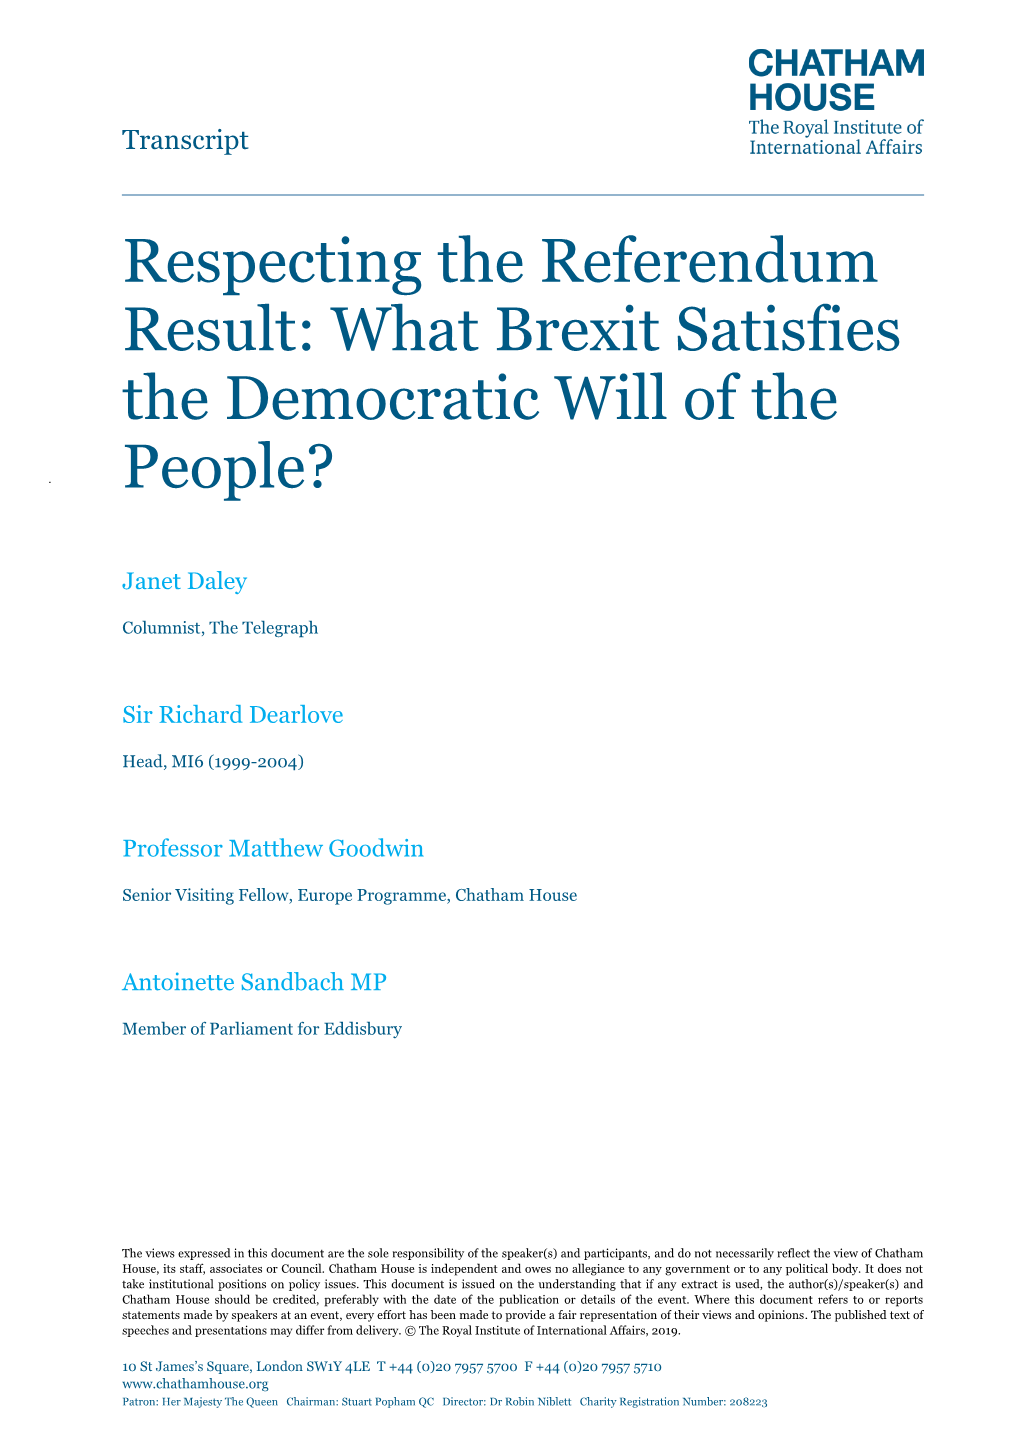 Respecting the Referendum Result: What Brexit Satisfies the Democratic Will of the People?